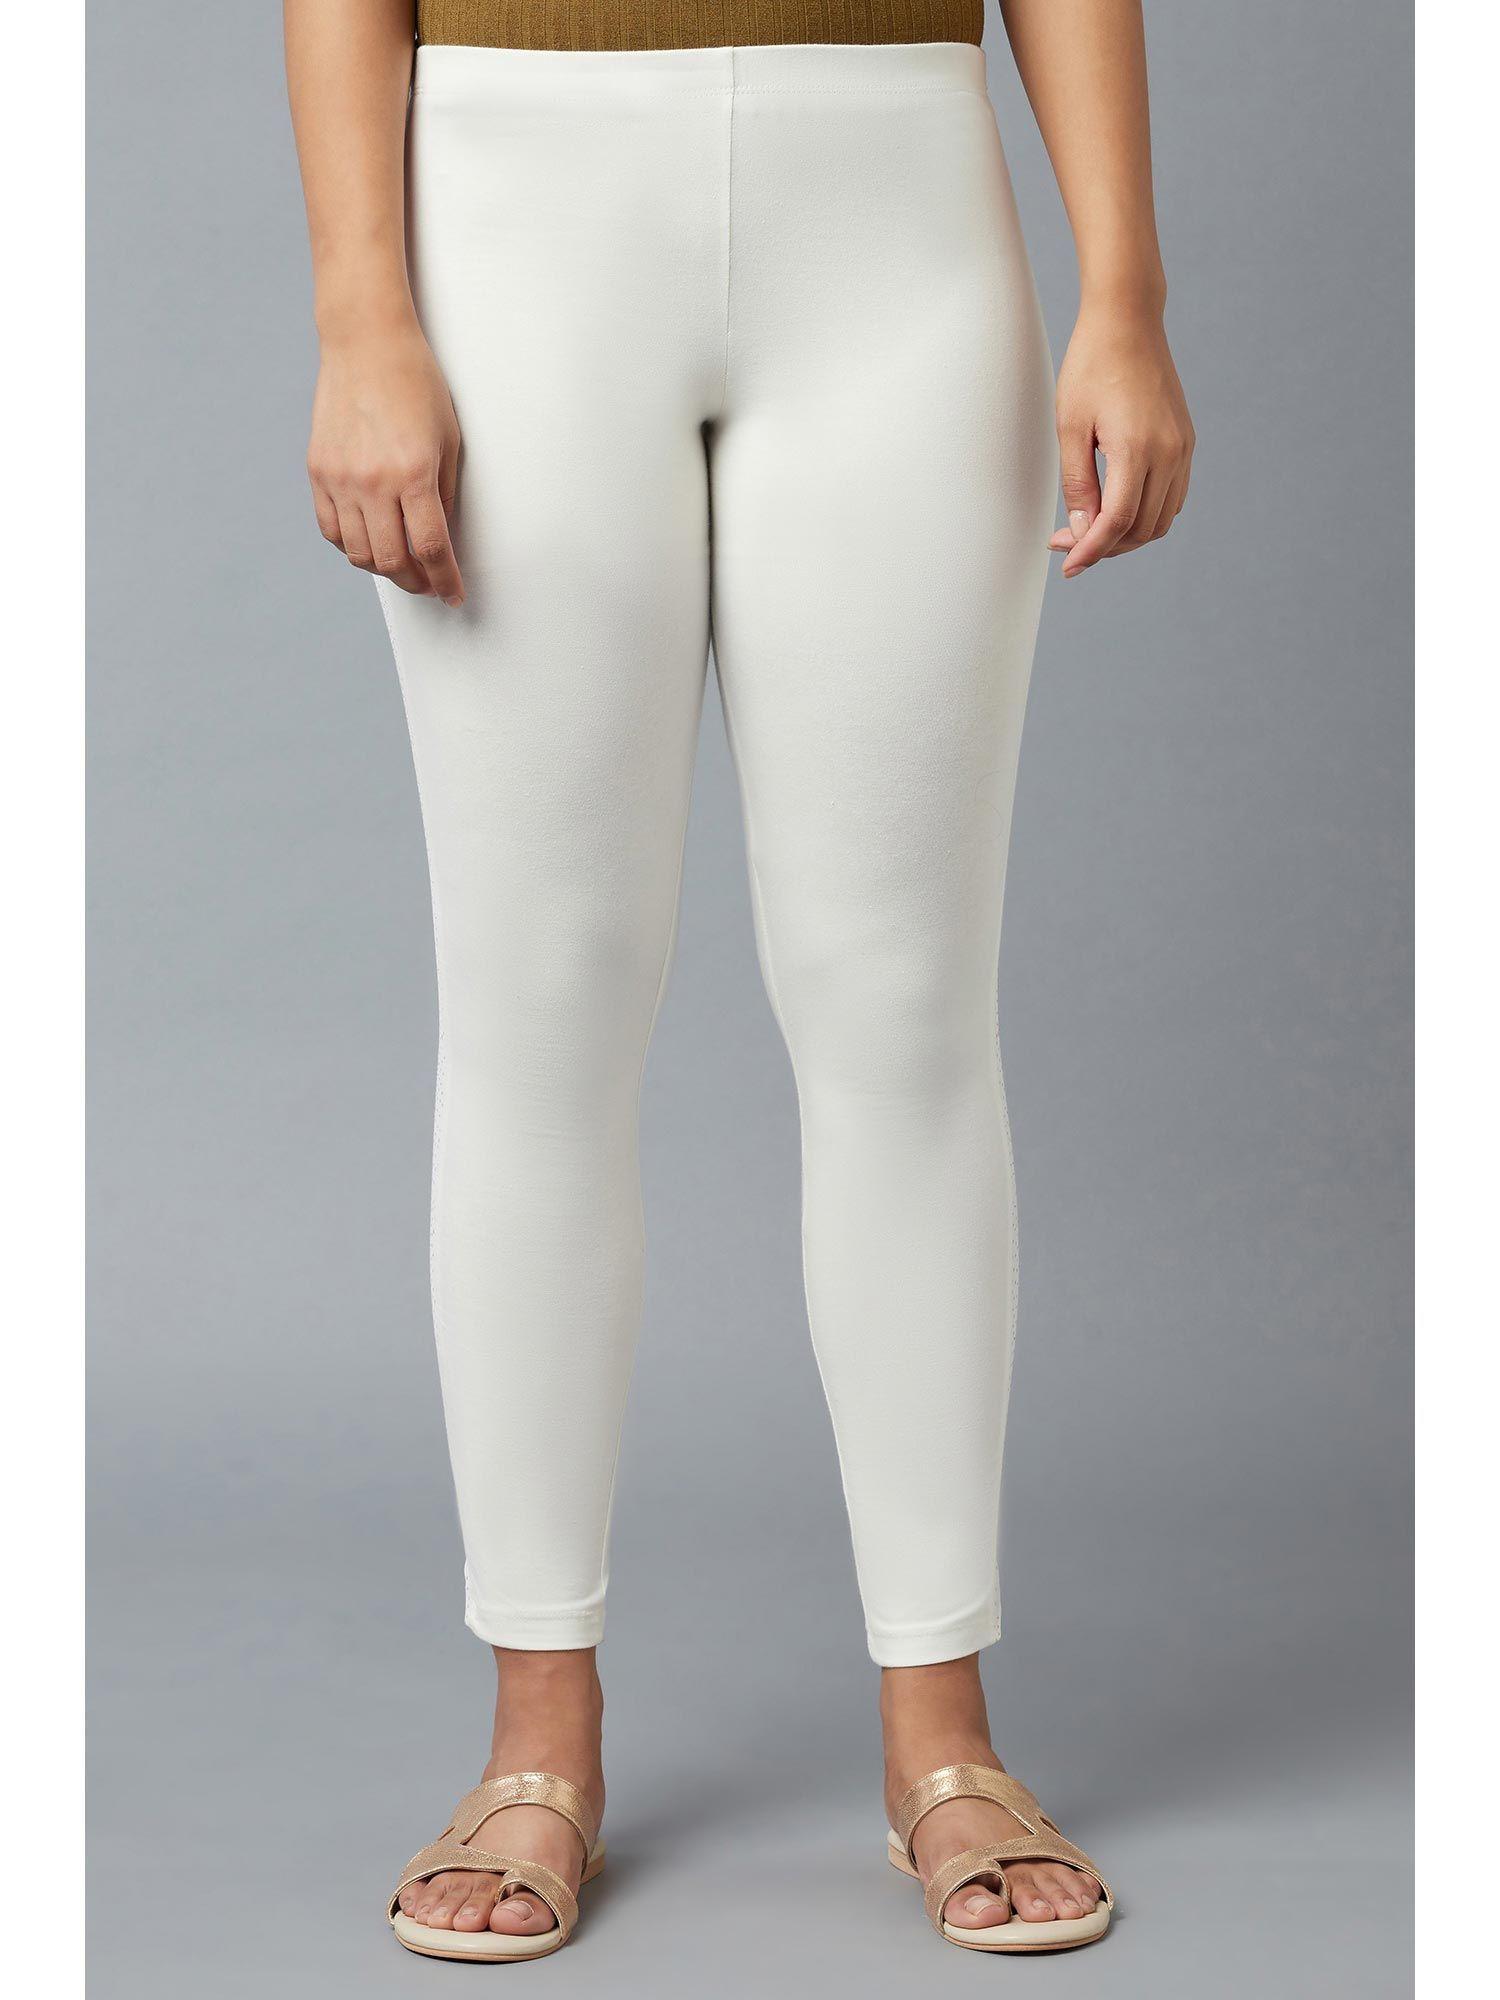 white-cotton-lycra-tights-for-women